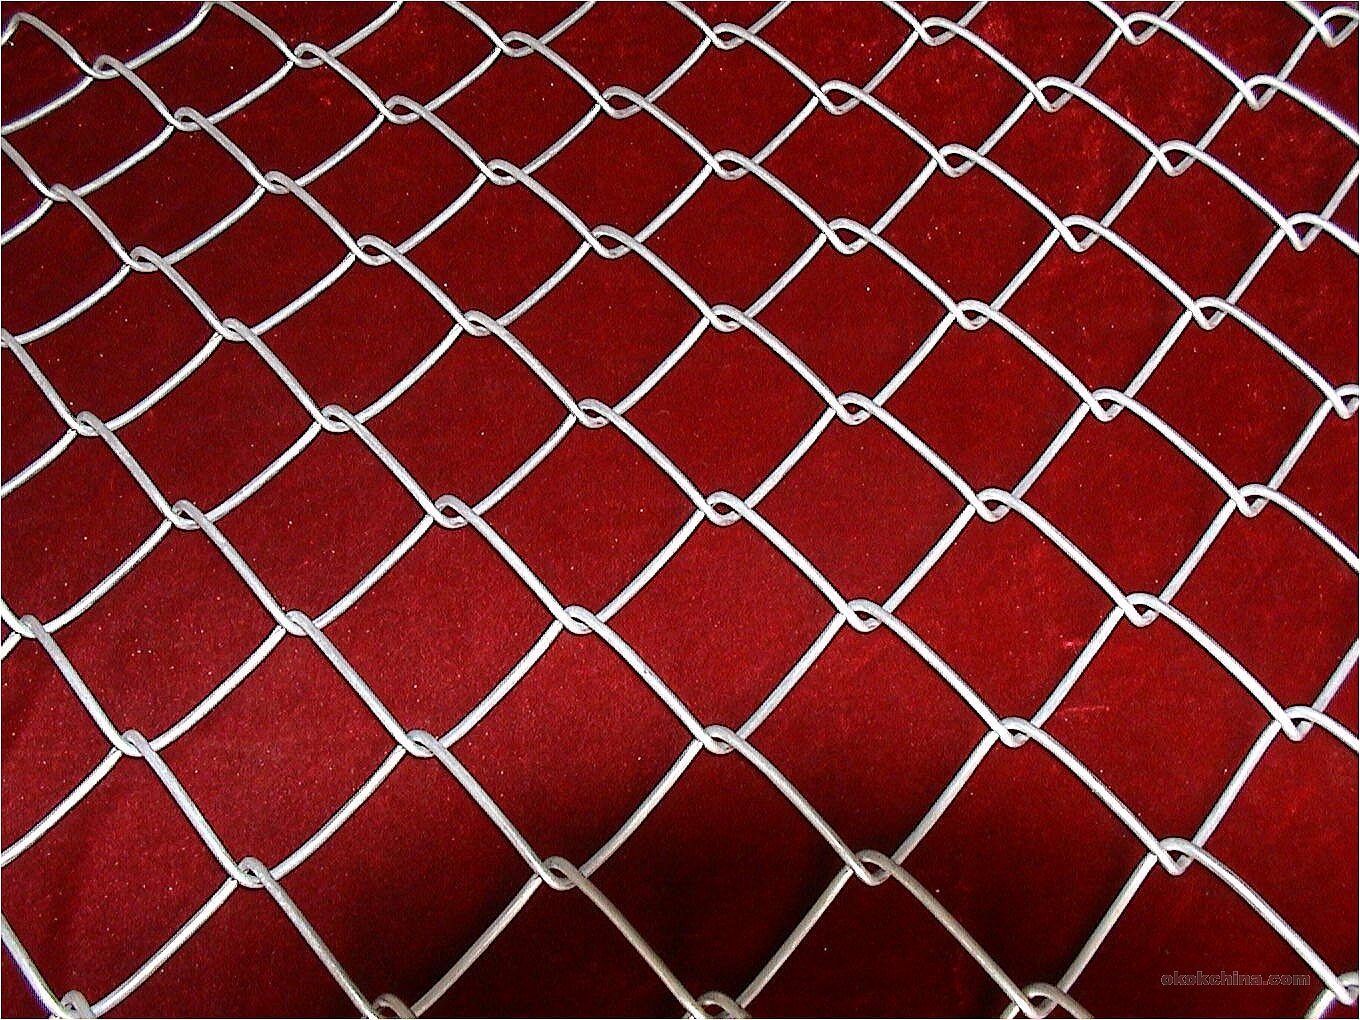 Security Fences: Your First Line of Defense Against Intruders